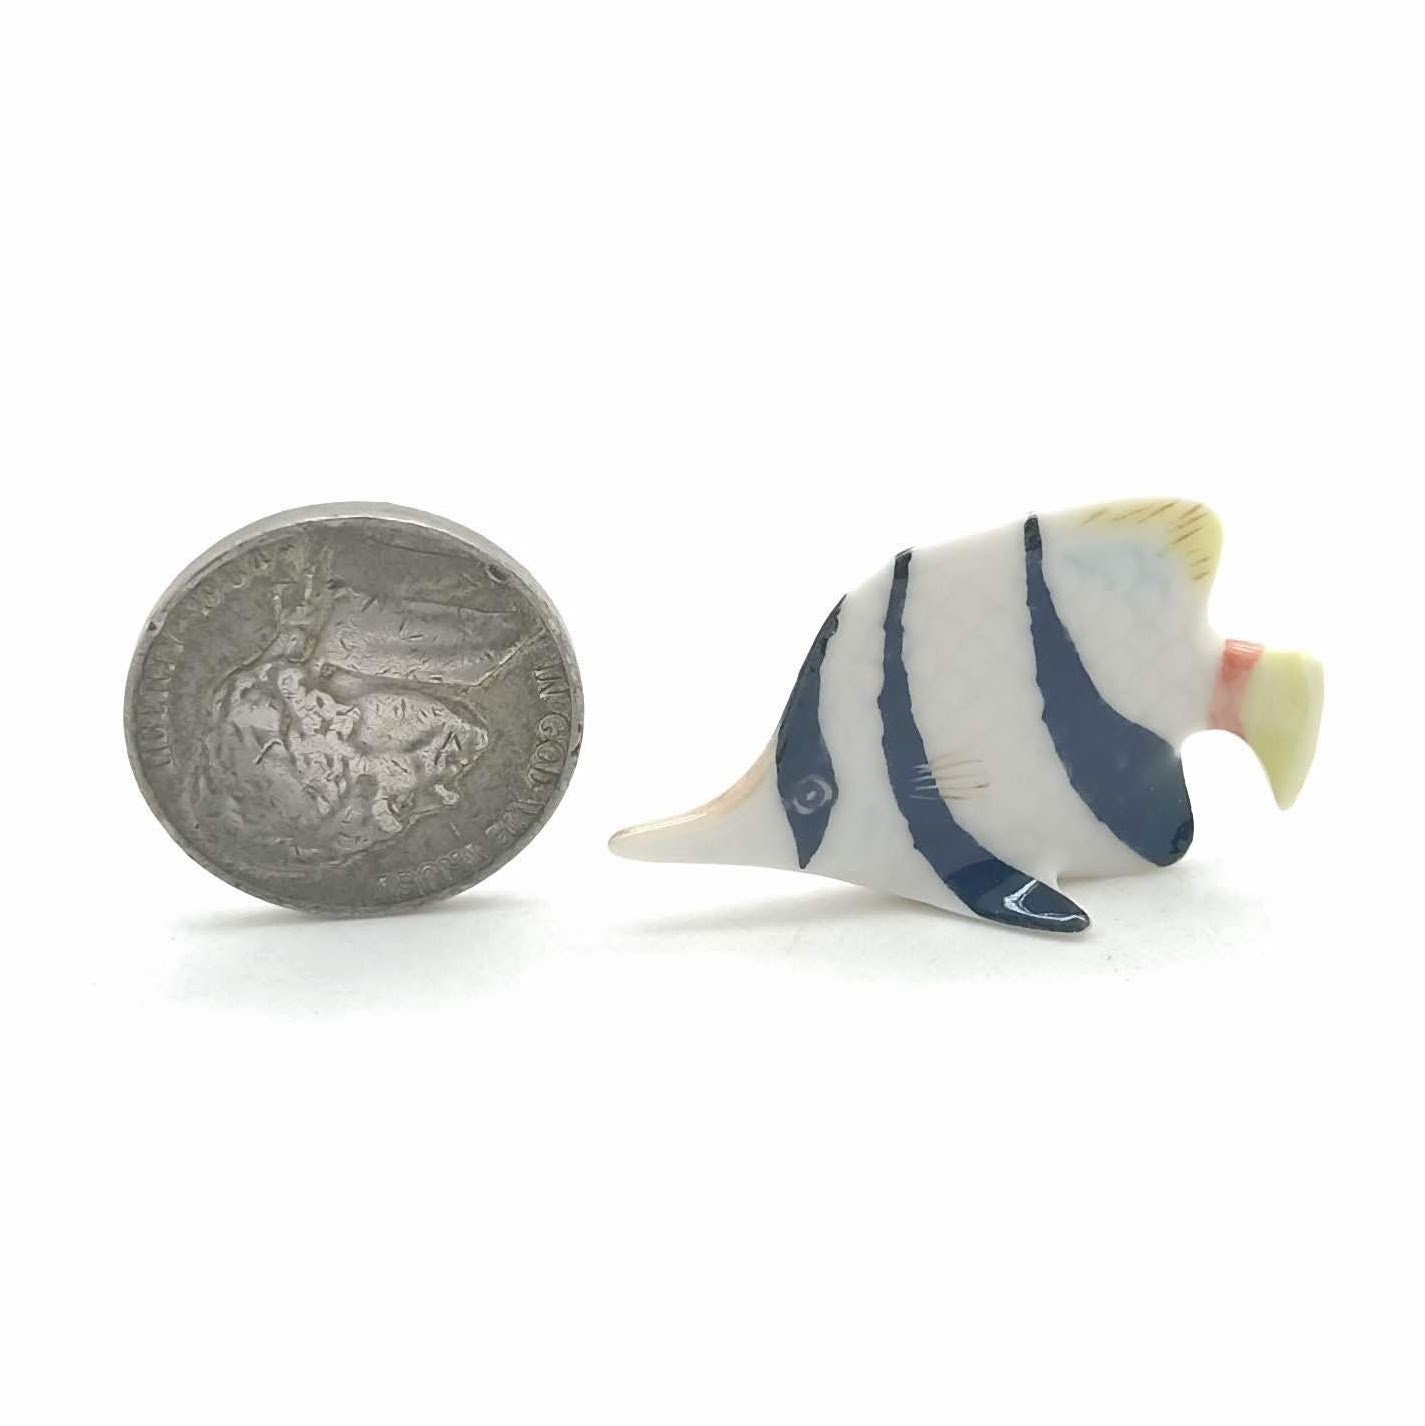 Set of 6 Baby Butterfly Fish Ceramic Figurine Statue